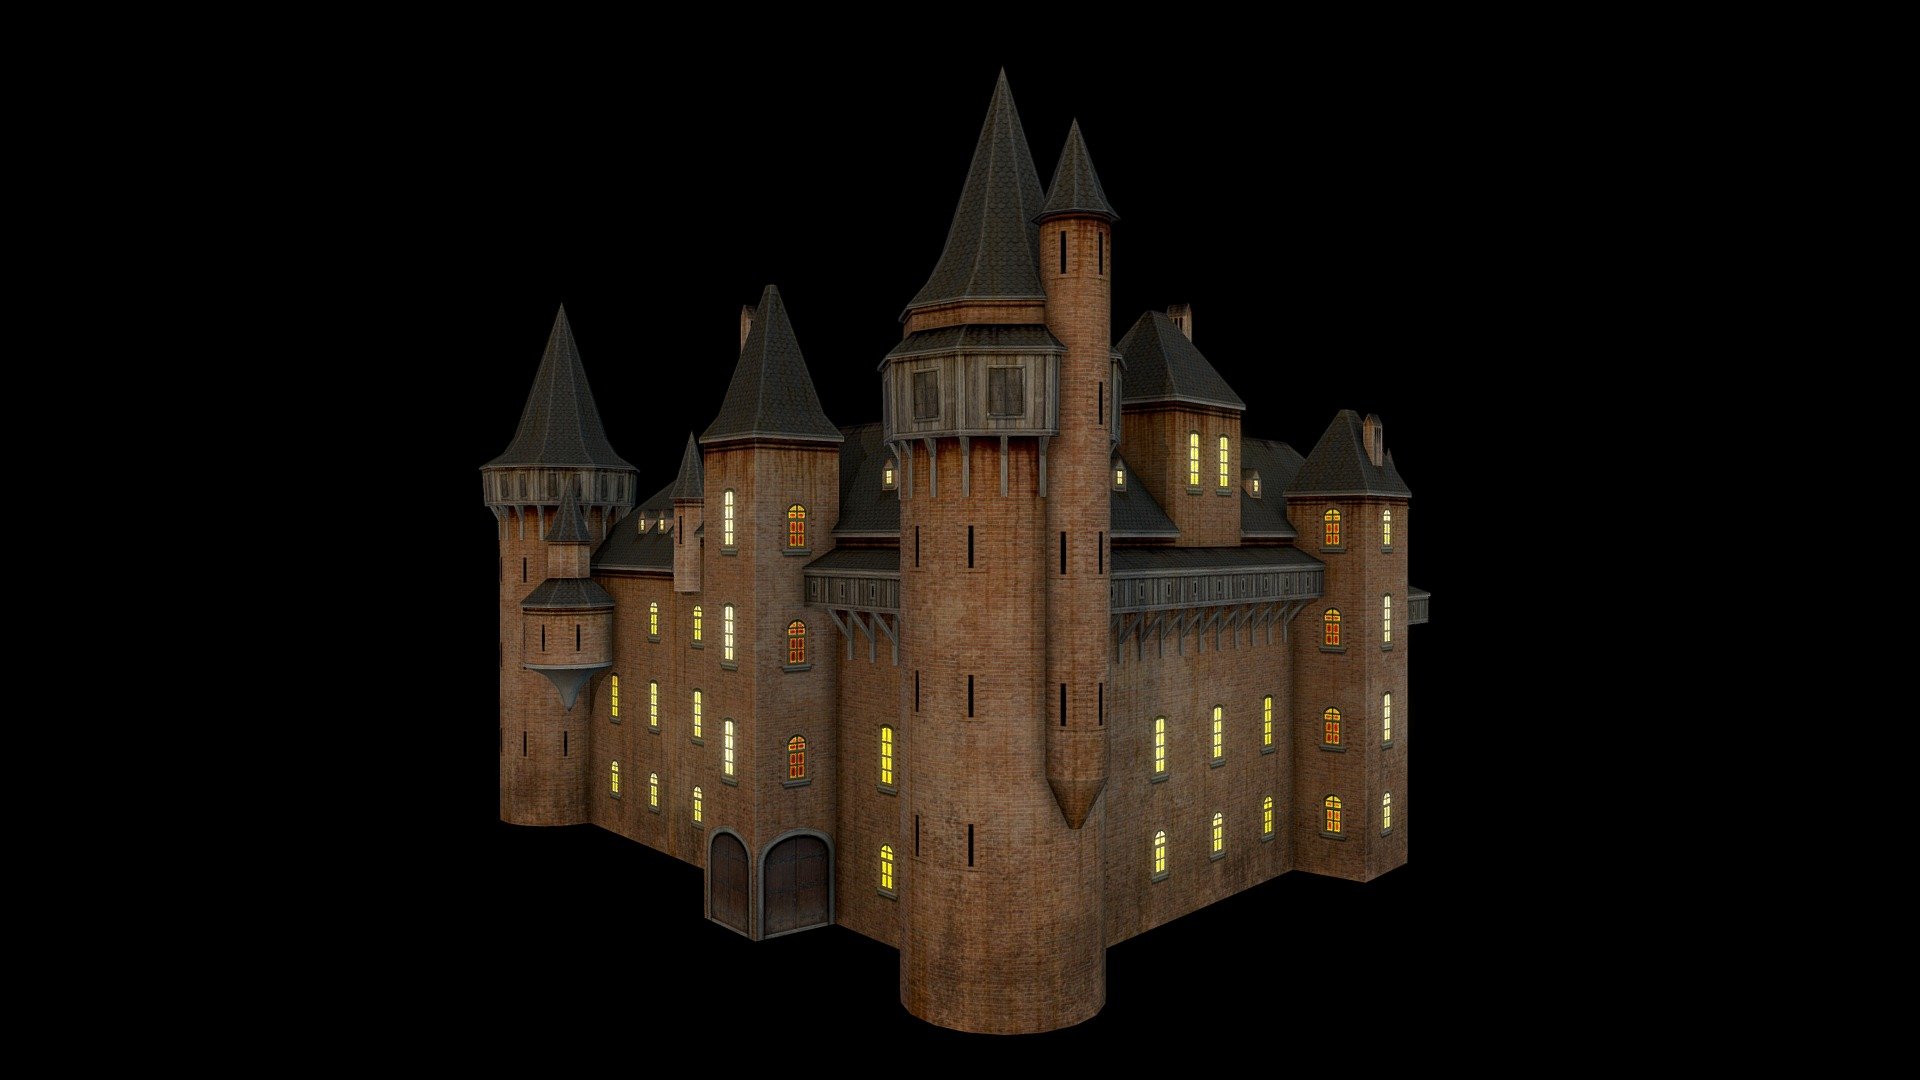 Only for preview purposes, night cycle setup displayed. You can purchase this asset here: https://skfb.ly/oKYKr - Castle Chateau (Night Cycle) - 3D model by RealtimeModels 3d model